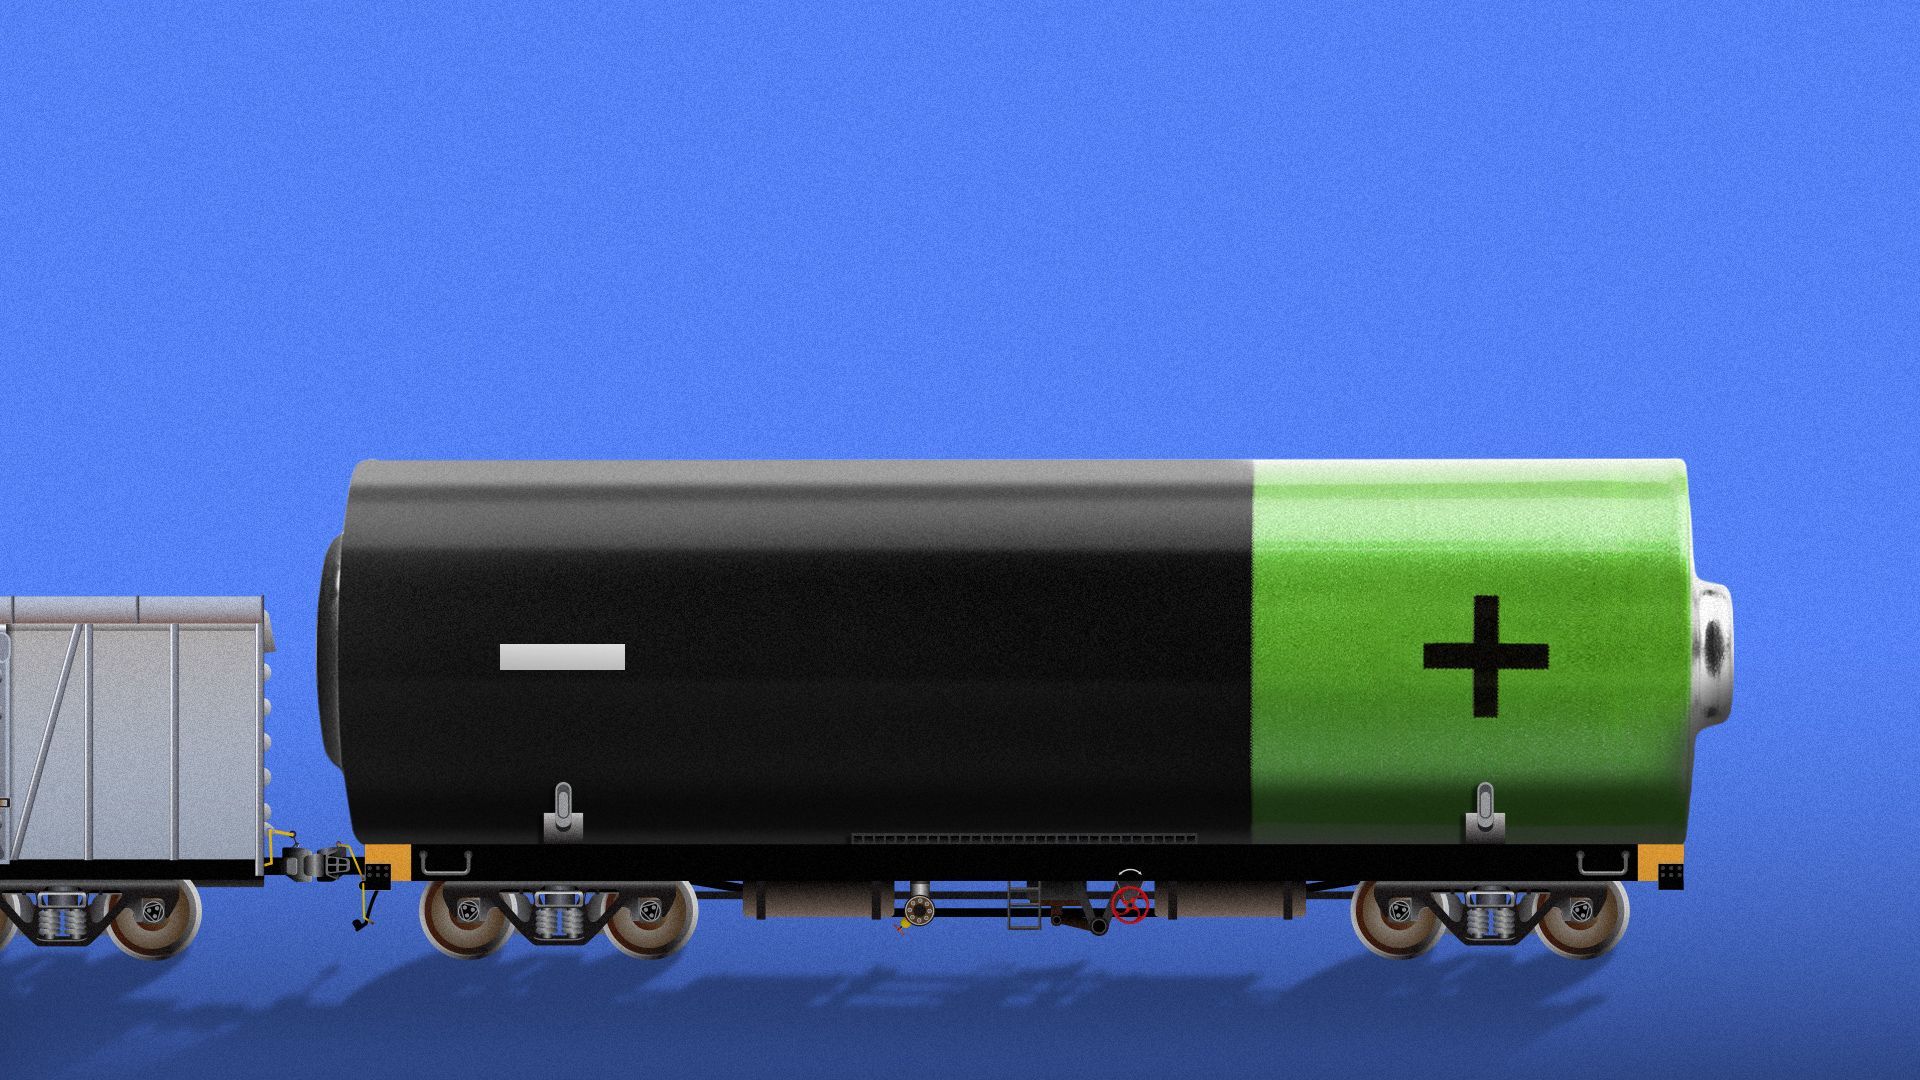 Illustration of a locomotive made from a huge battery.